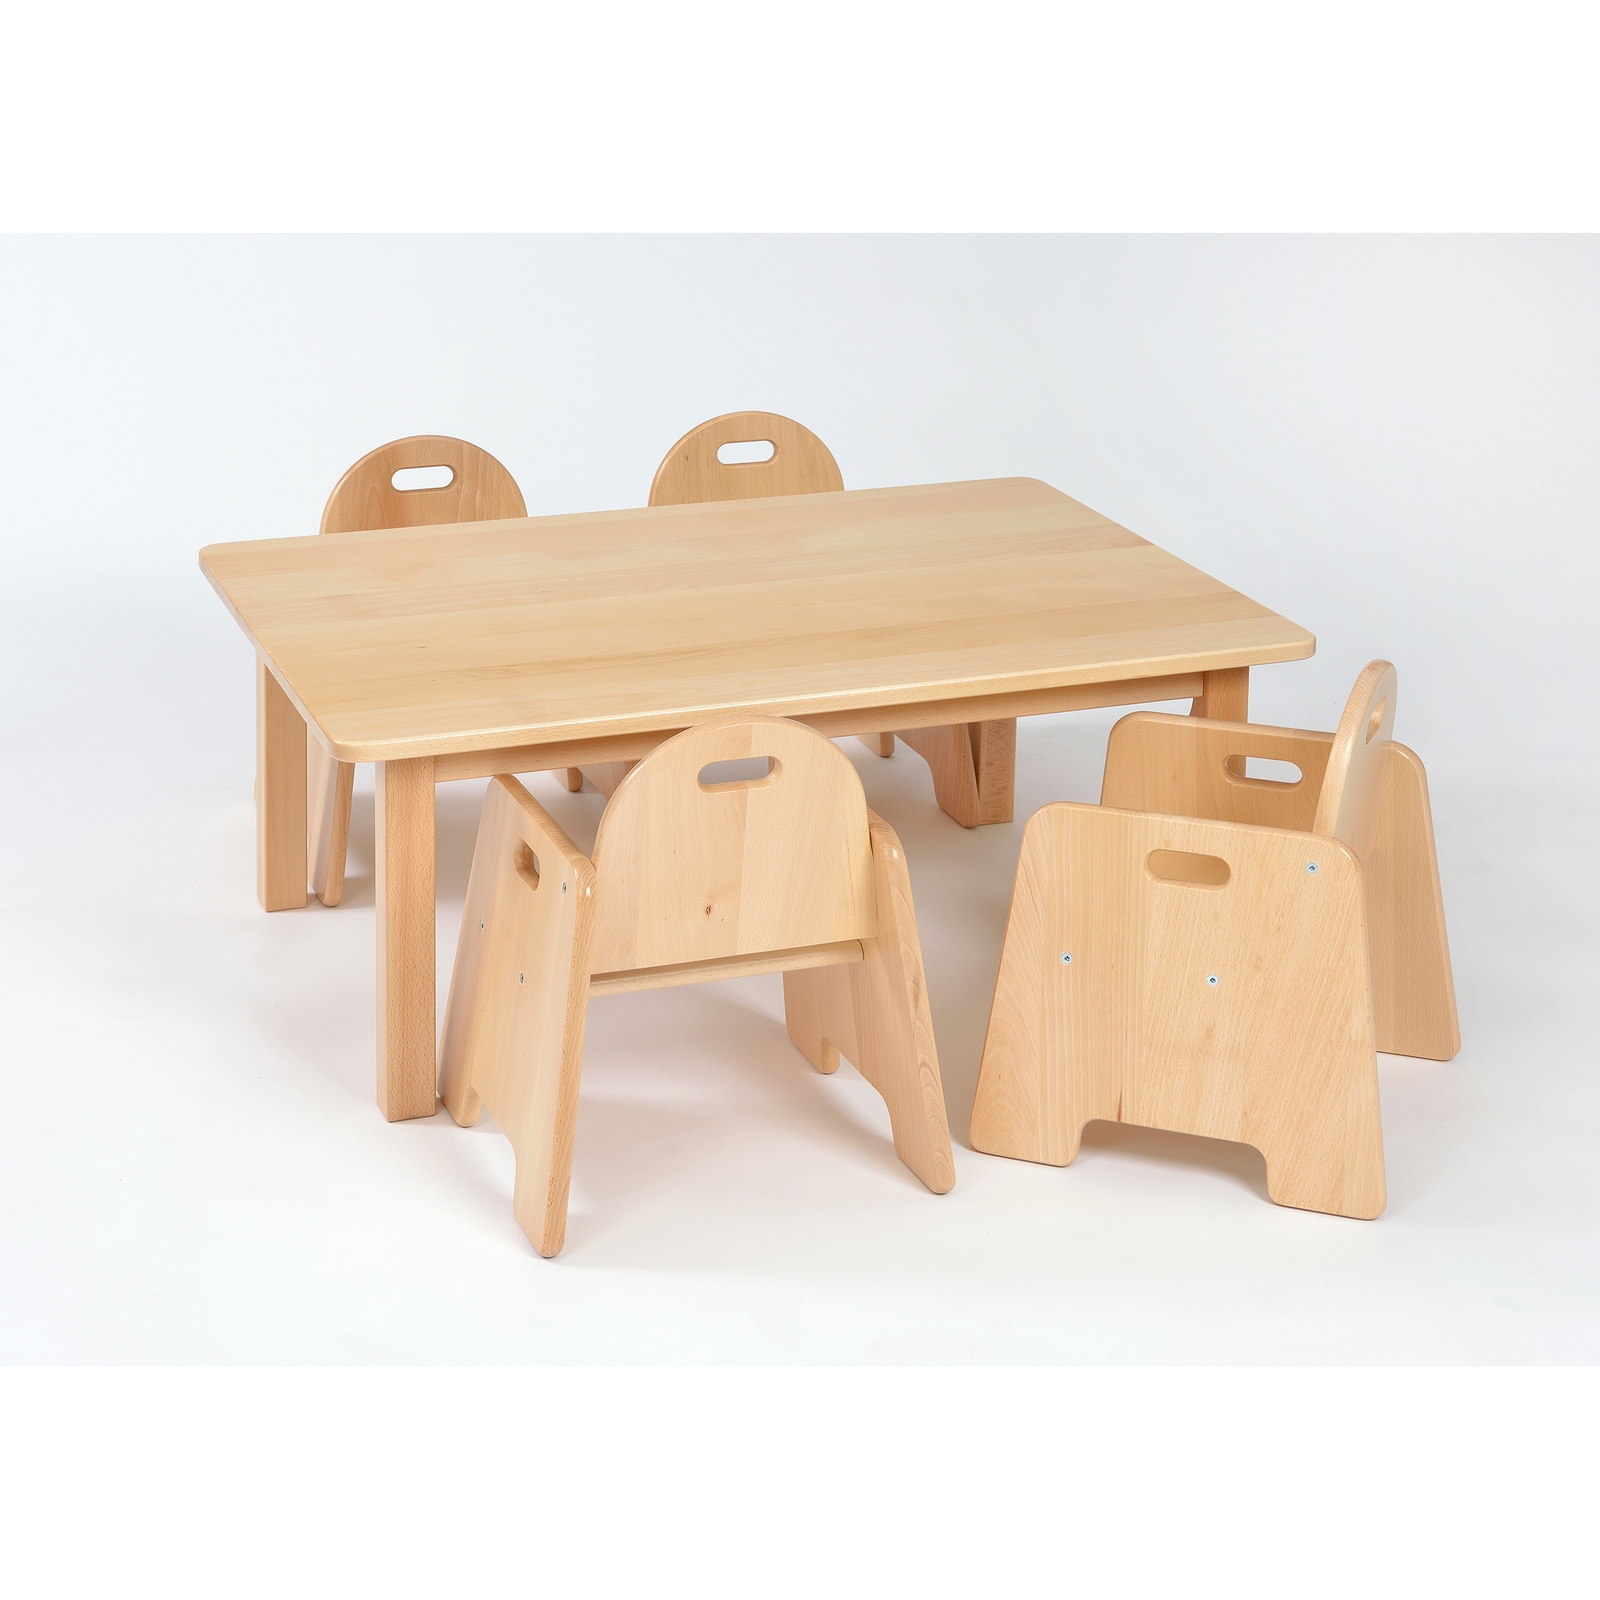 Galt Rect Table 4 Chairs -15-24 Months